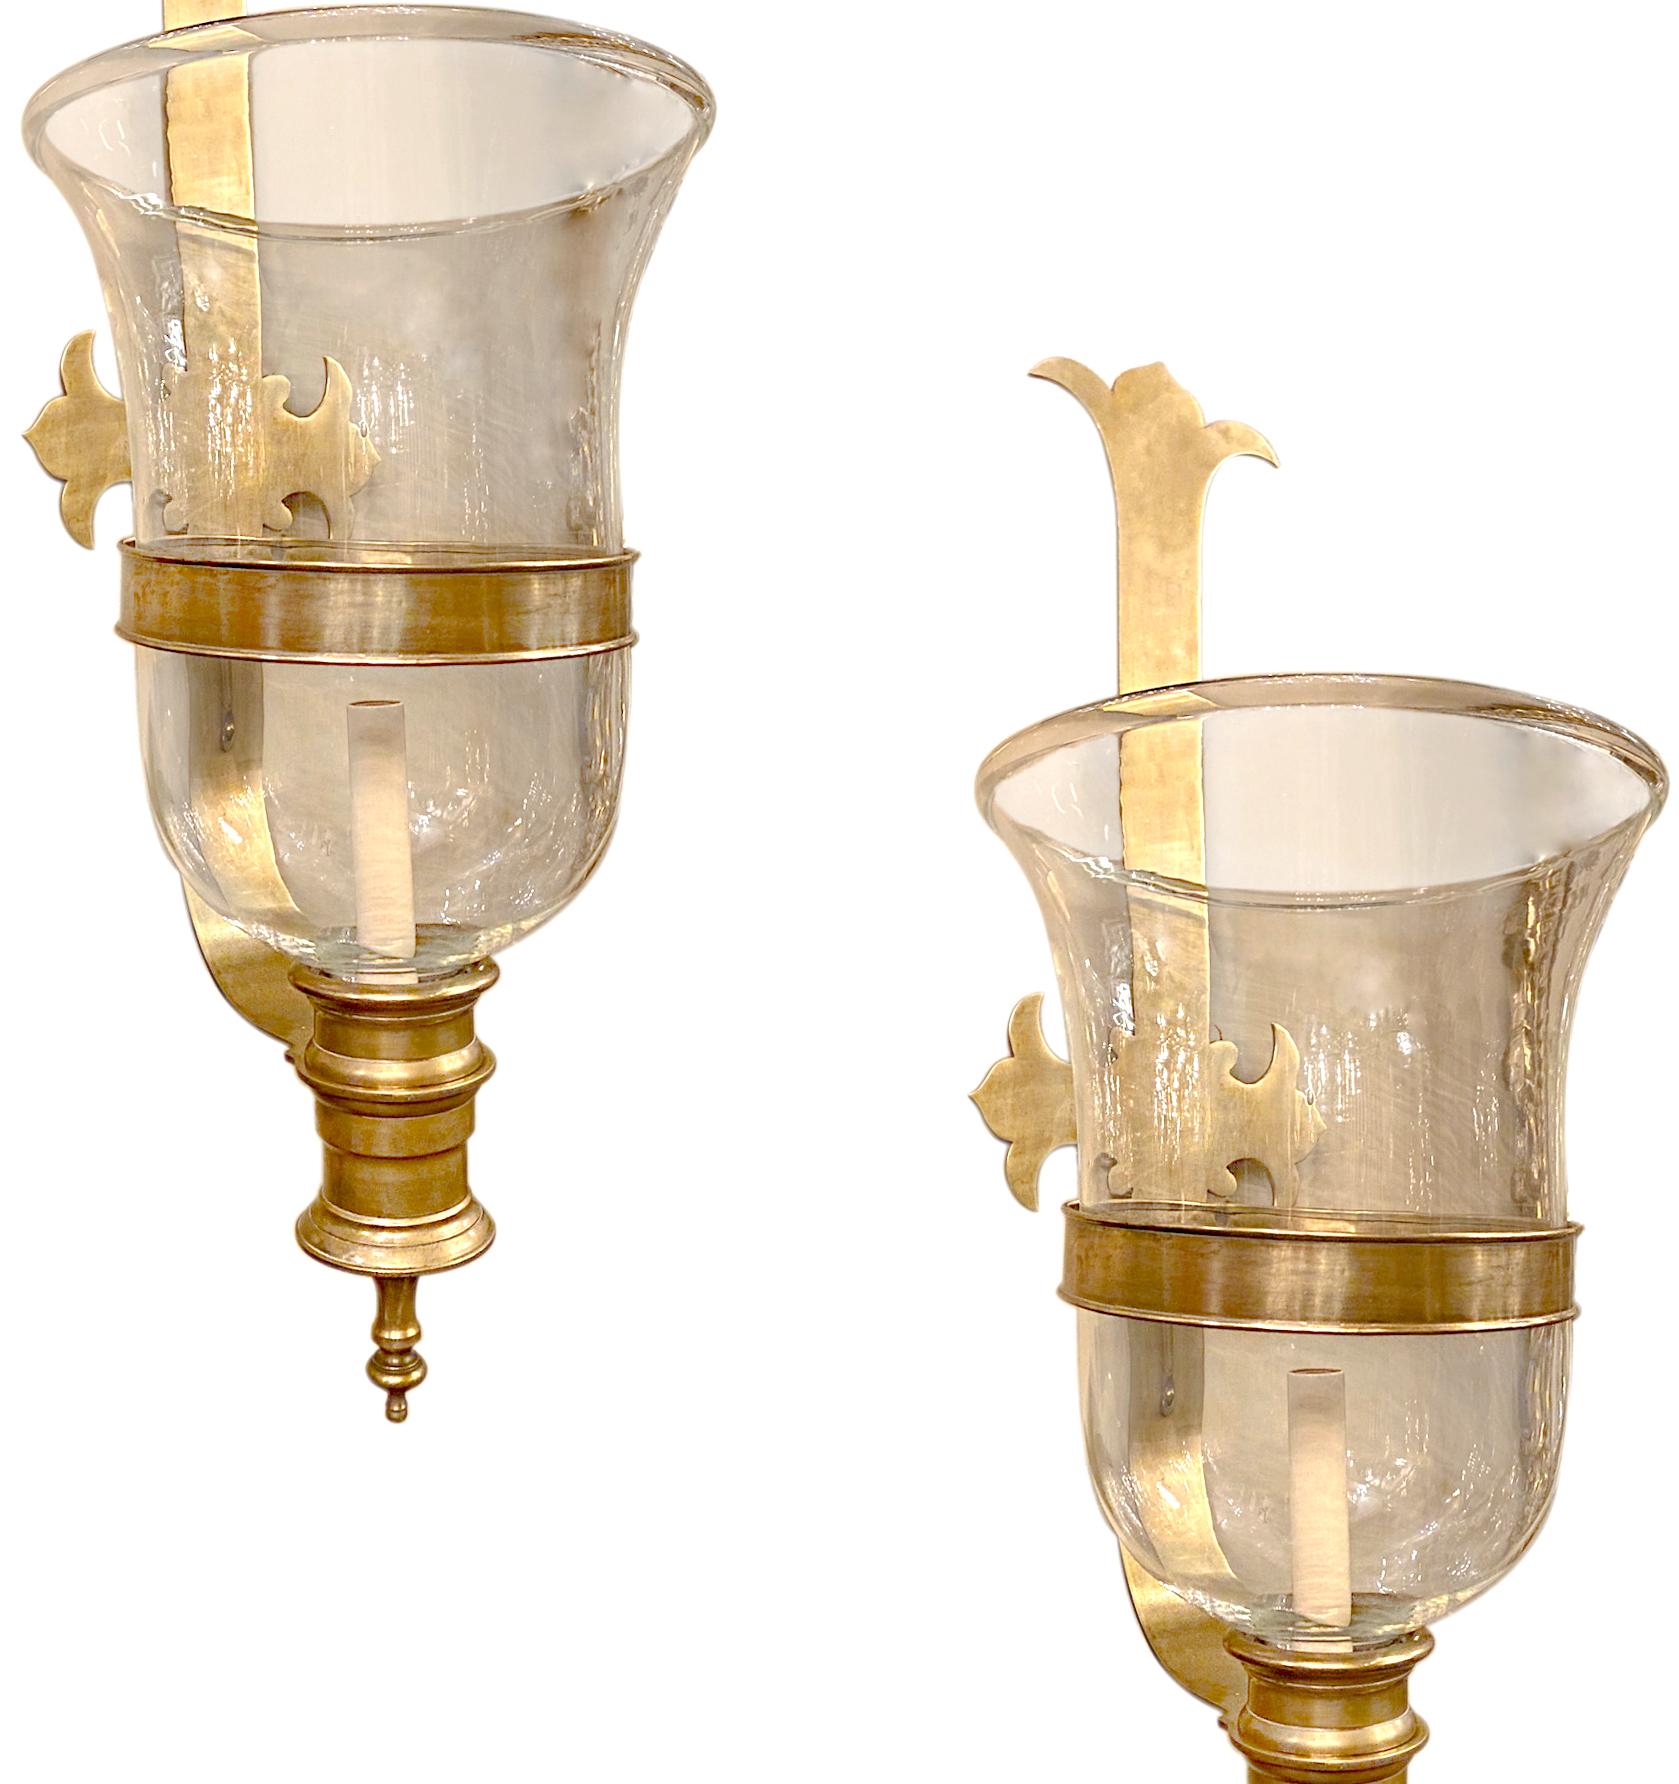 A pair of large circa 1960's English glass bell jar sconces with bronze hardware and single interior light.

Measurements:
Height: 30